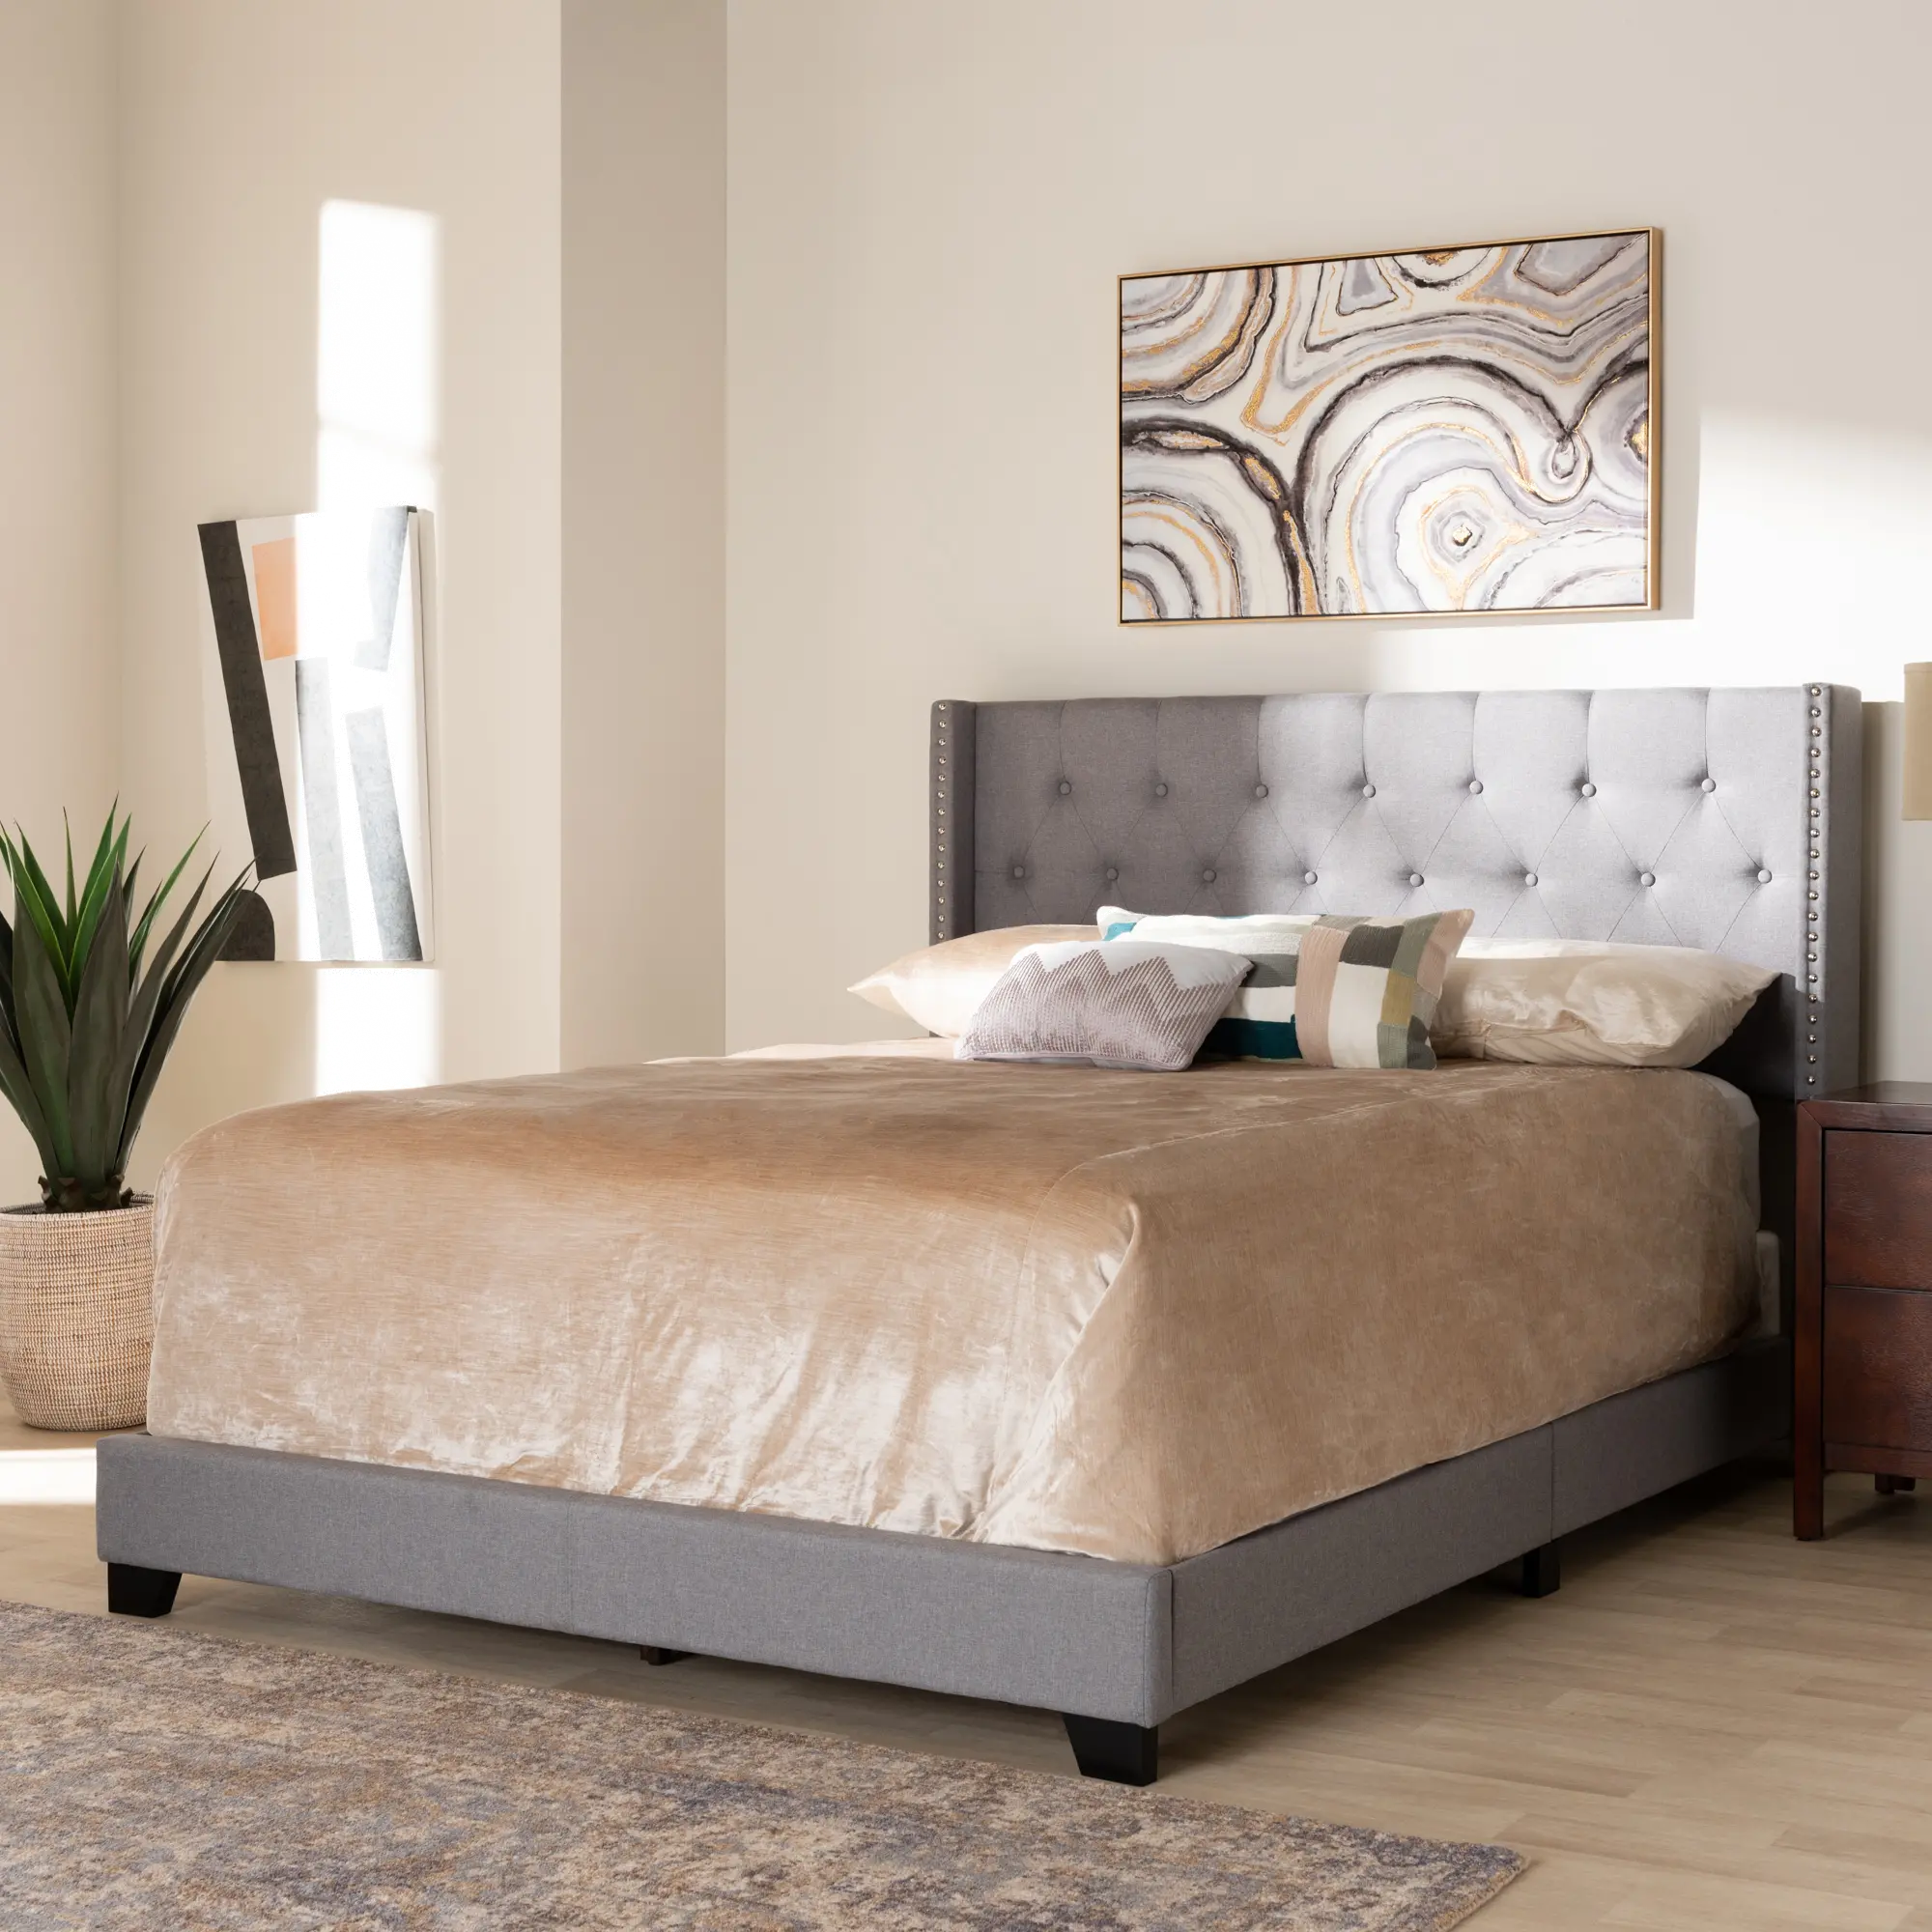 149-8940-RCW Contemporary Light Gray Upholstered King Bed - Wes sku 149-8940-RCW